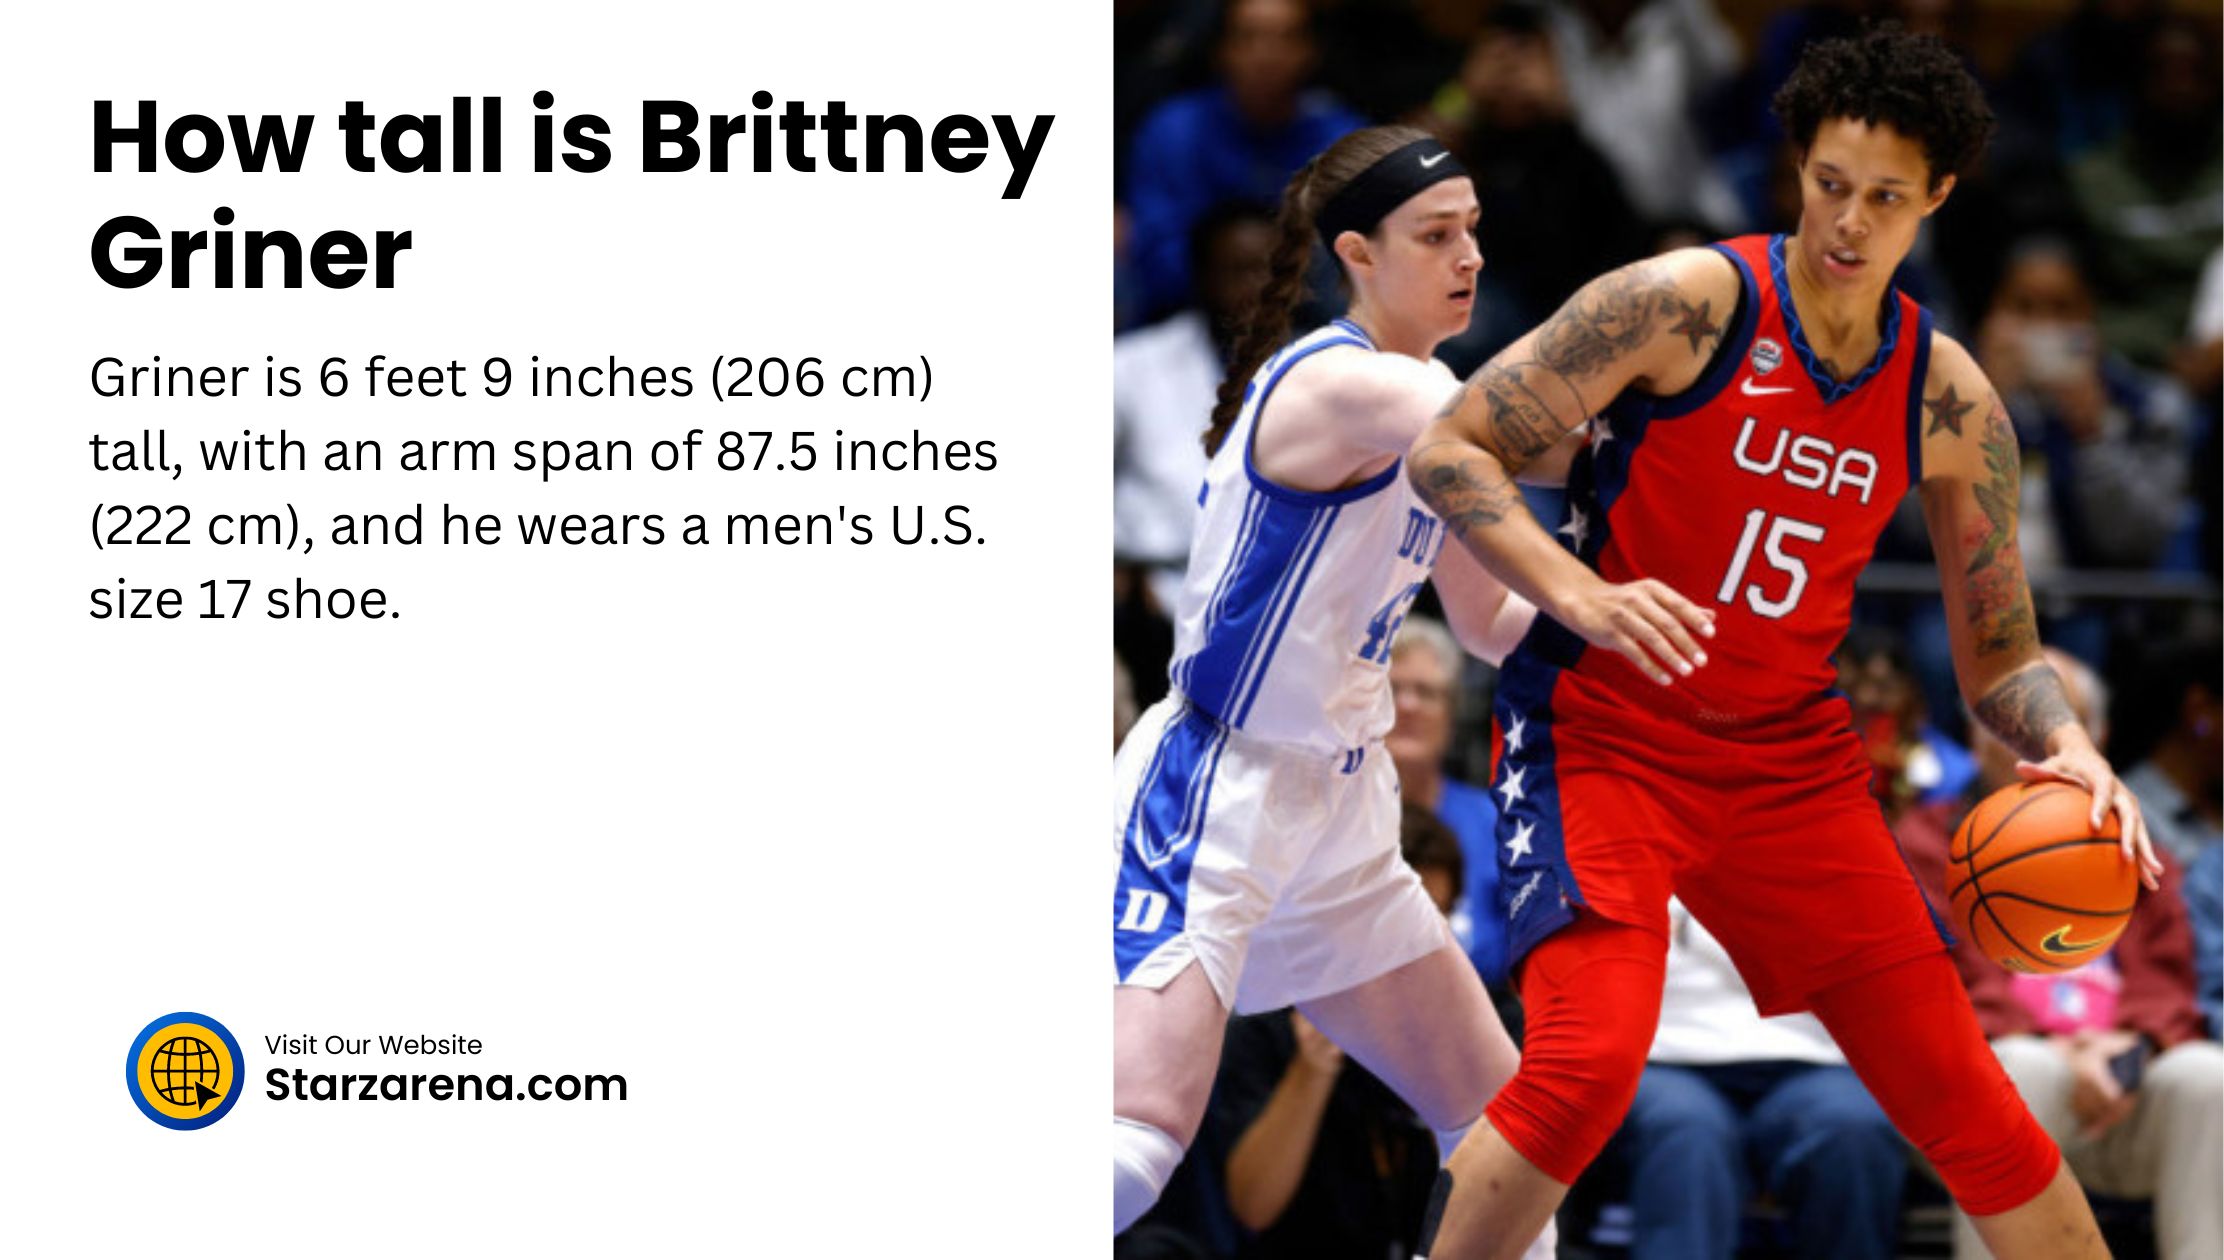 How tall is Brittney Griner?